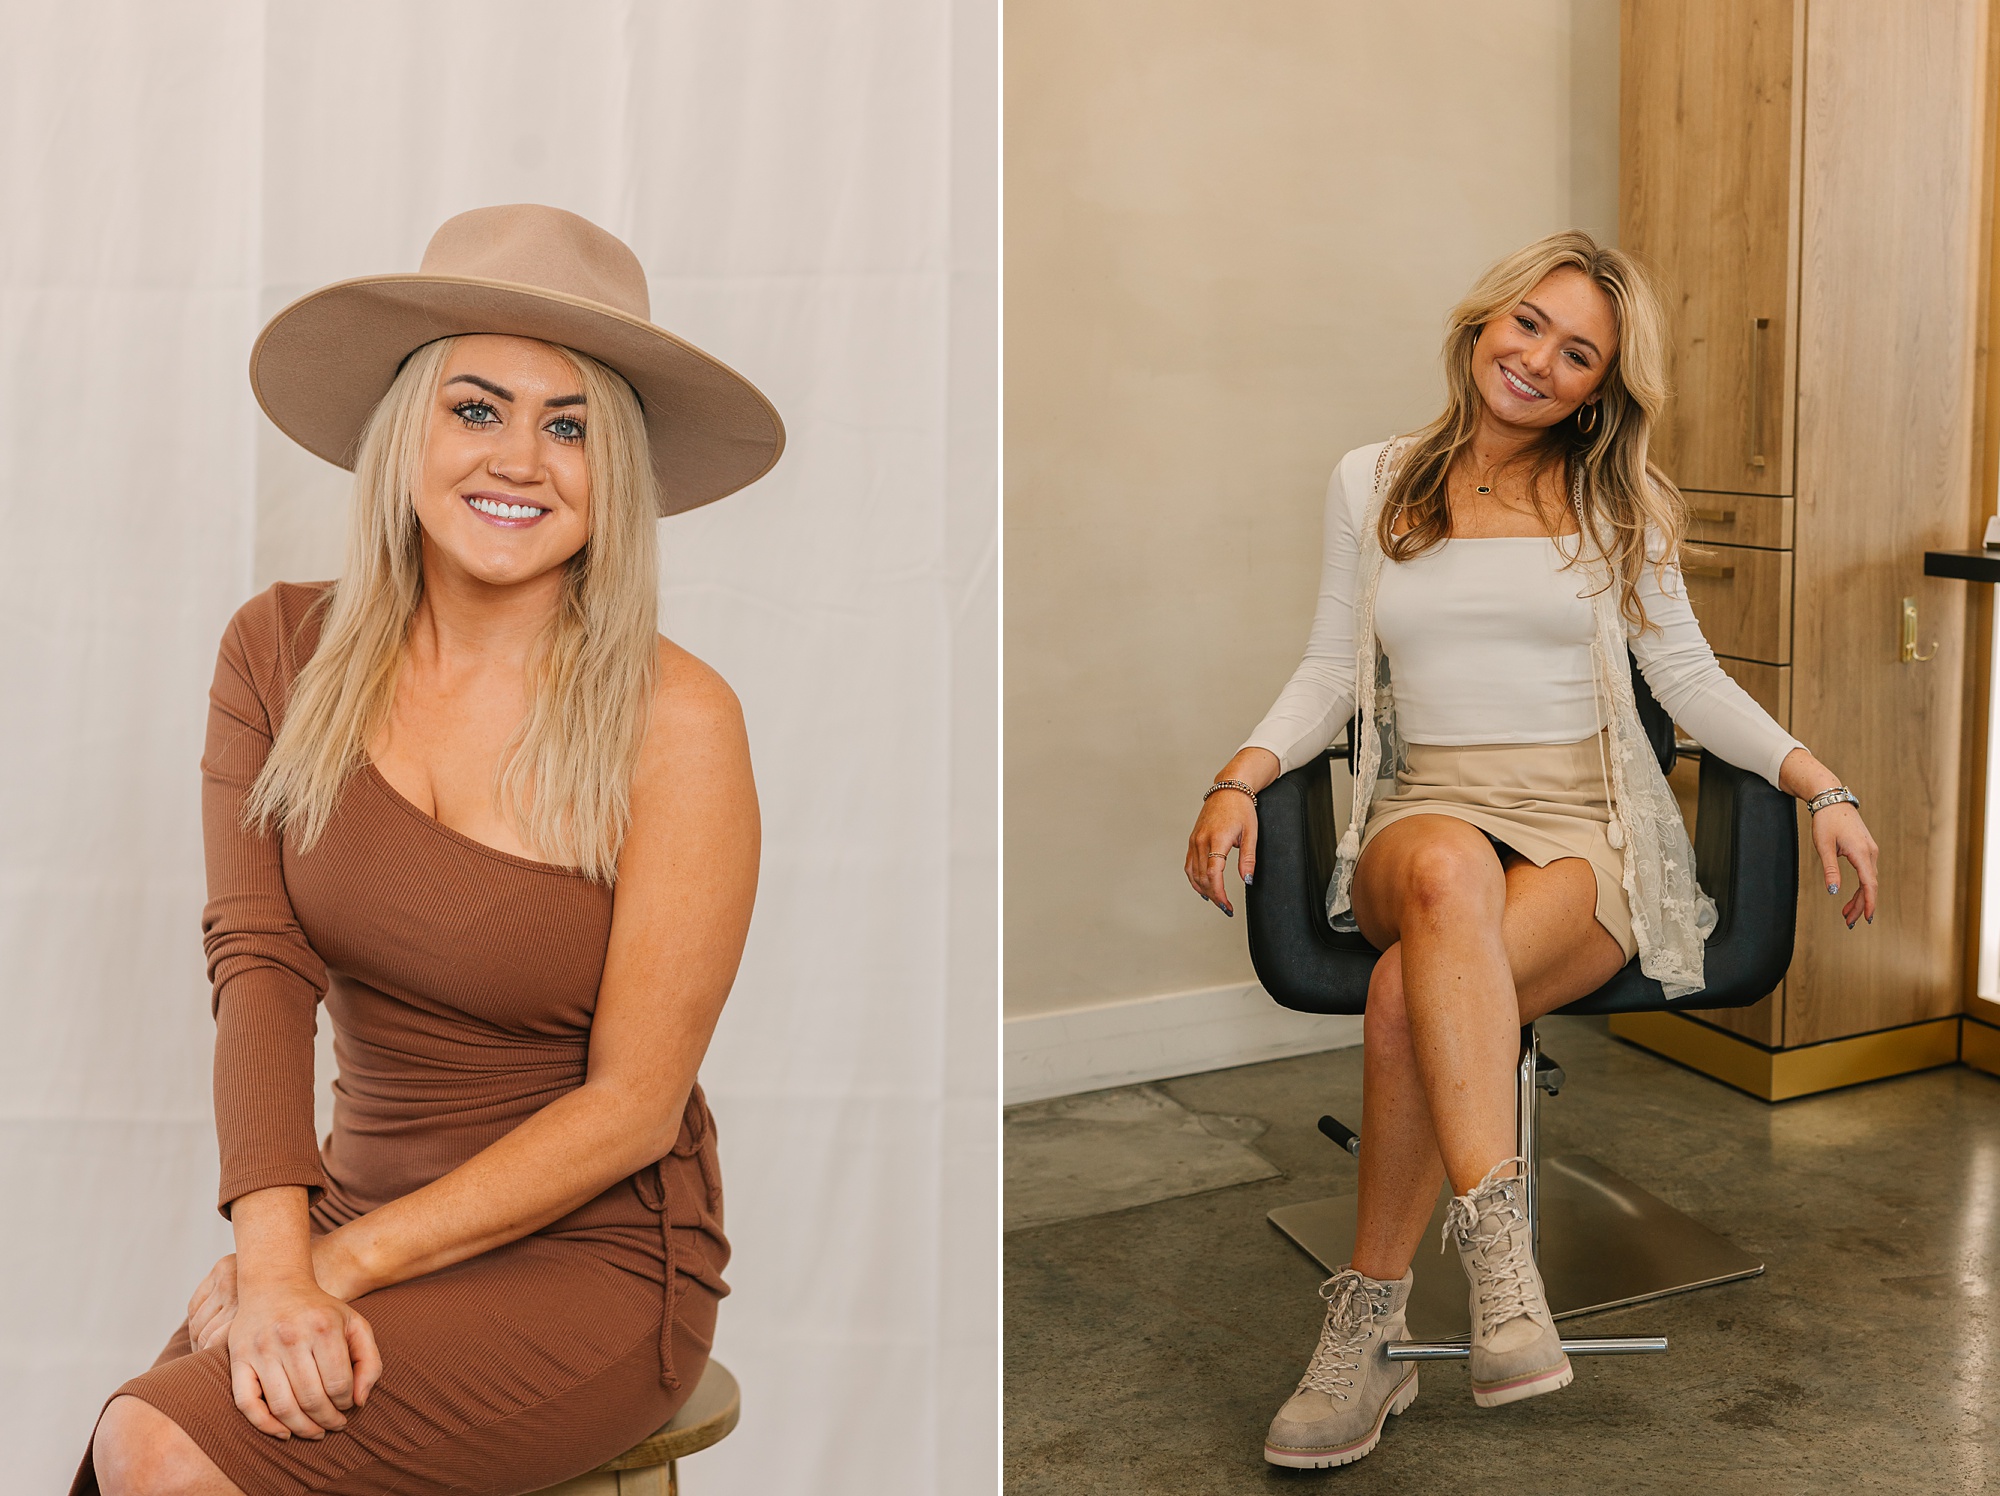 Nashville branding photographer Amy Allmand shares 5 reasons you need to refresh your headshots this year